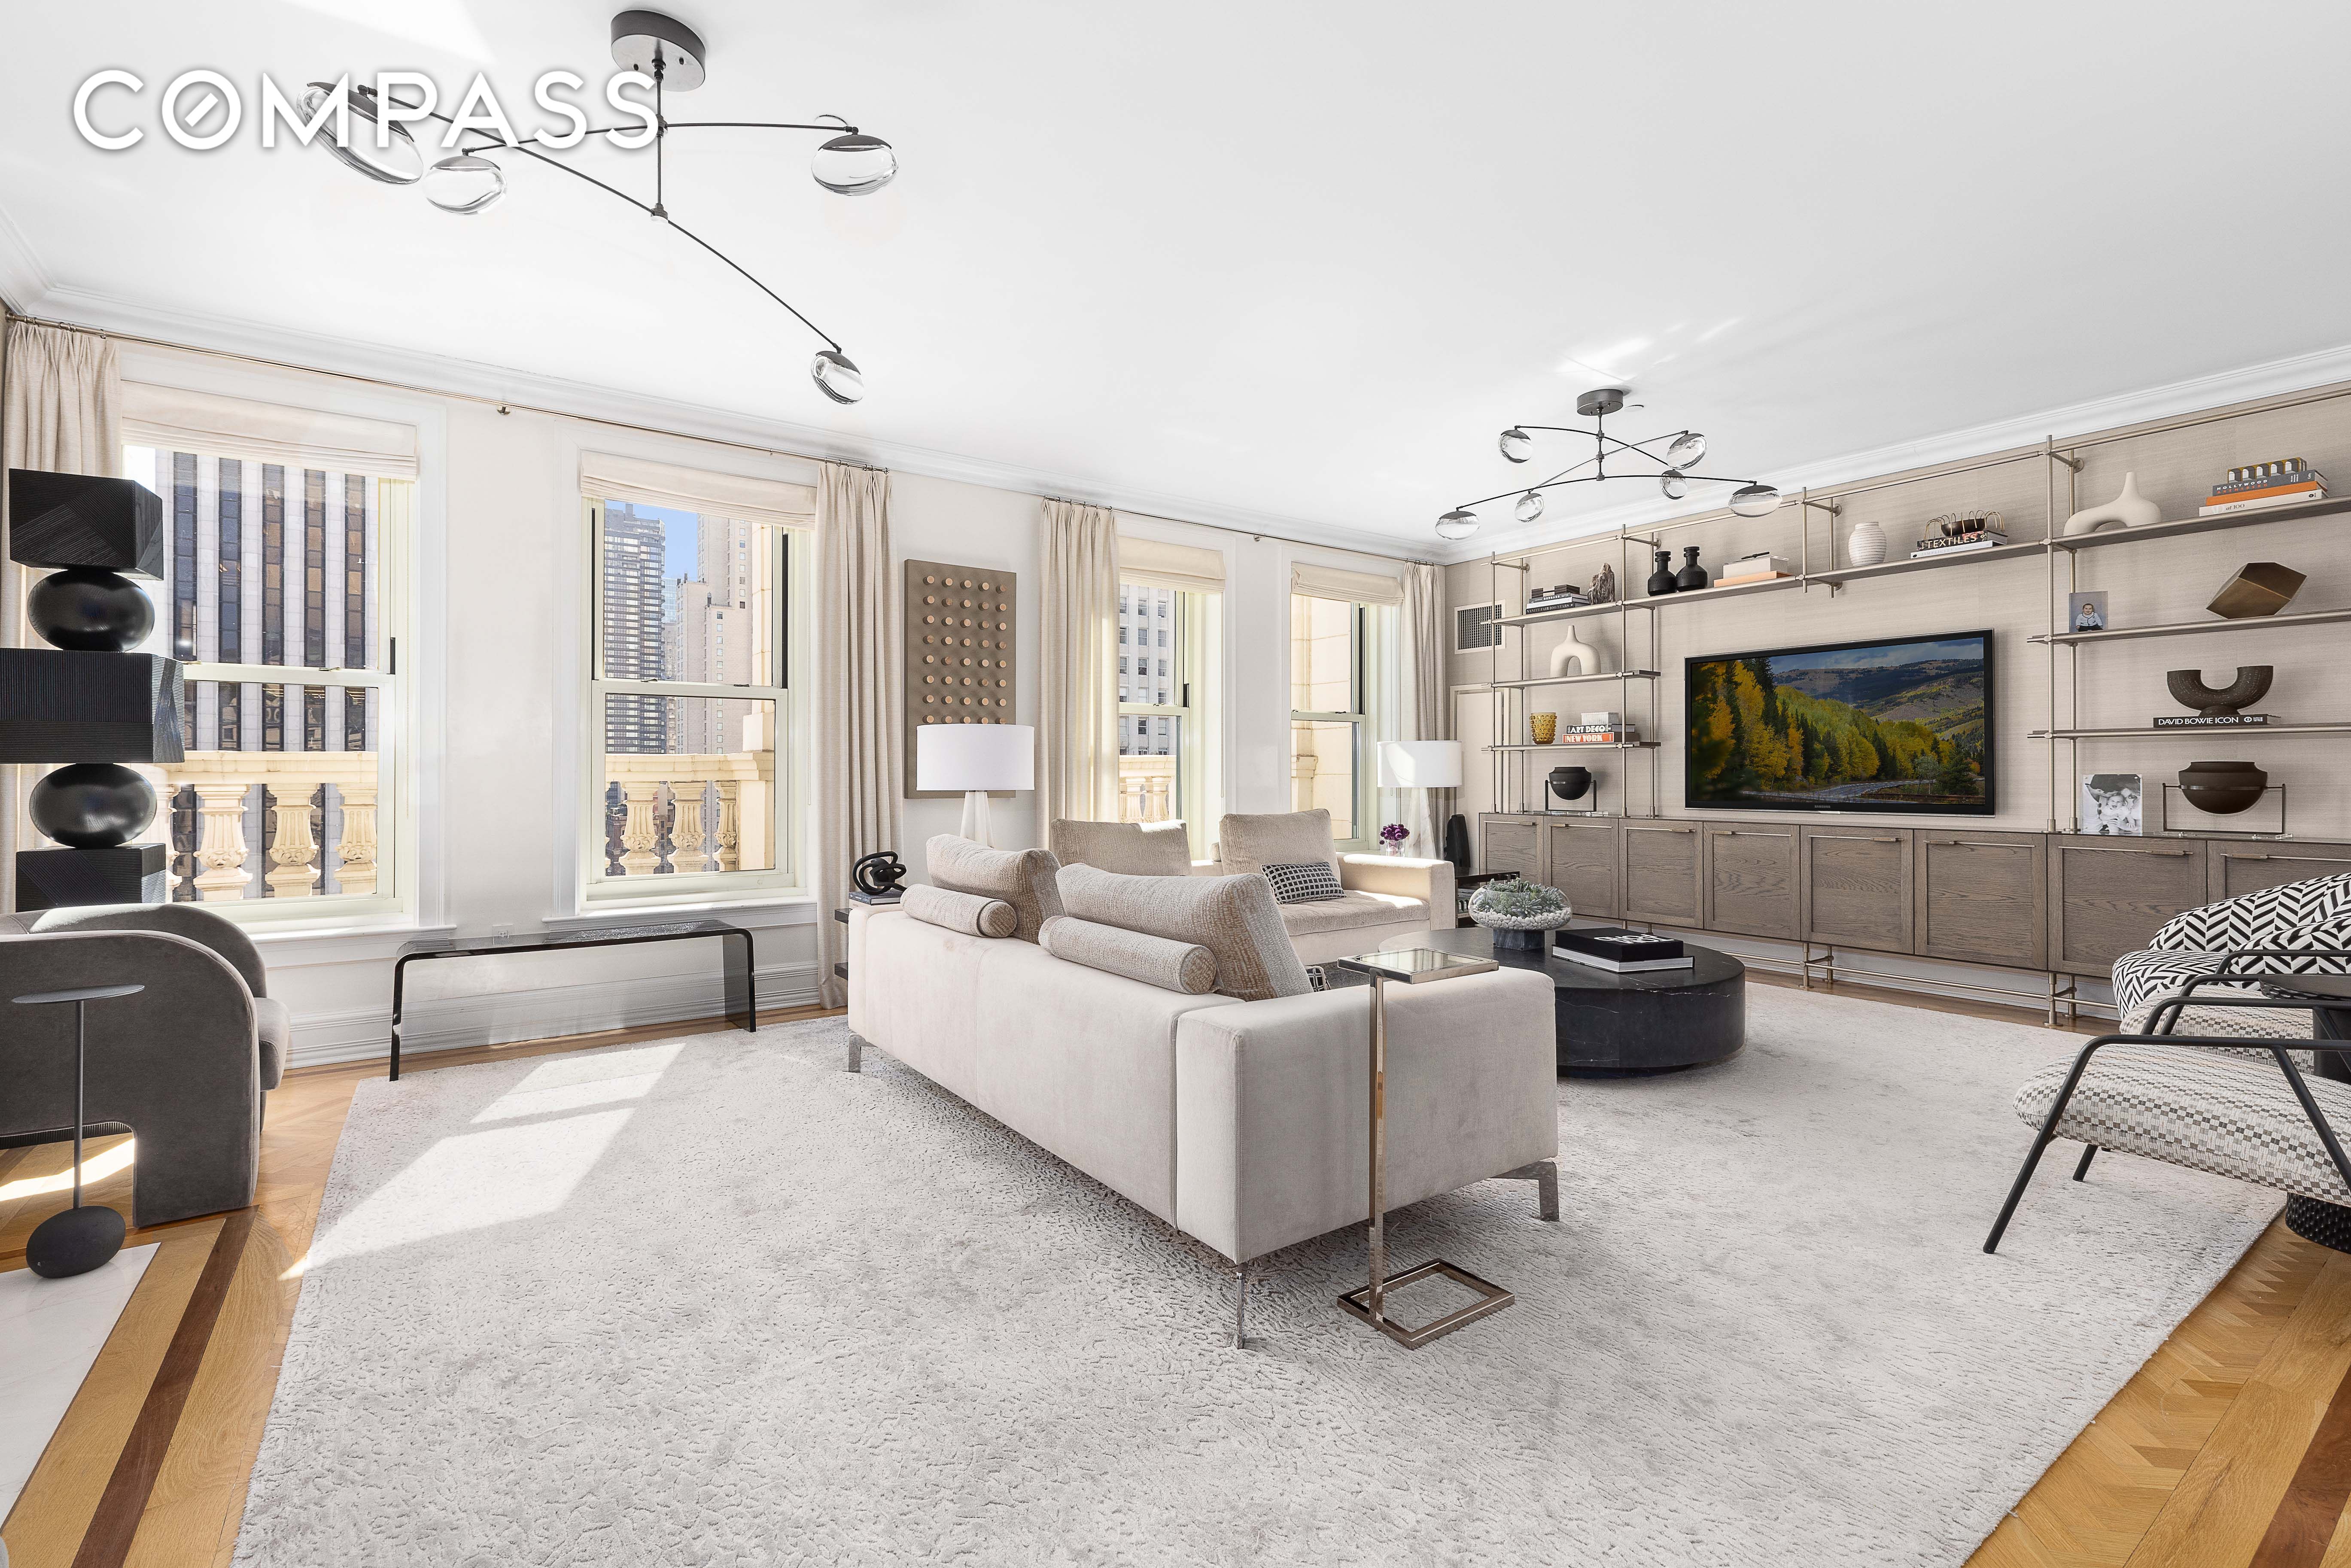 1 Central Park 1511/1513, Central Park South, Midtown West, NYC - 5 Bedrooms  
3.5 Bathrooms  
7 Rooms - 